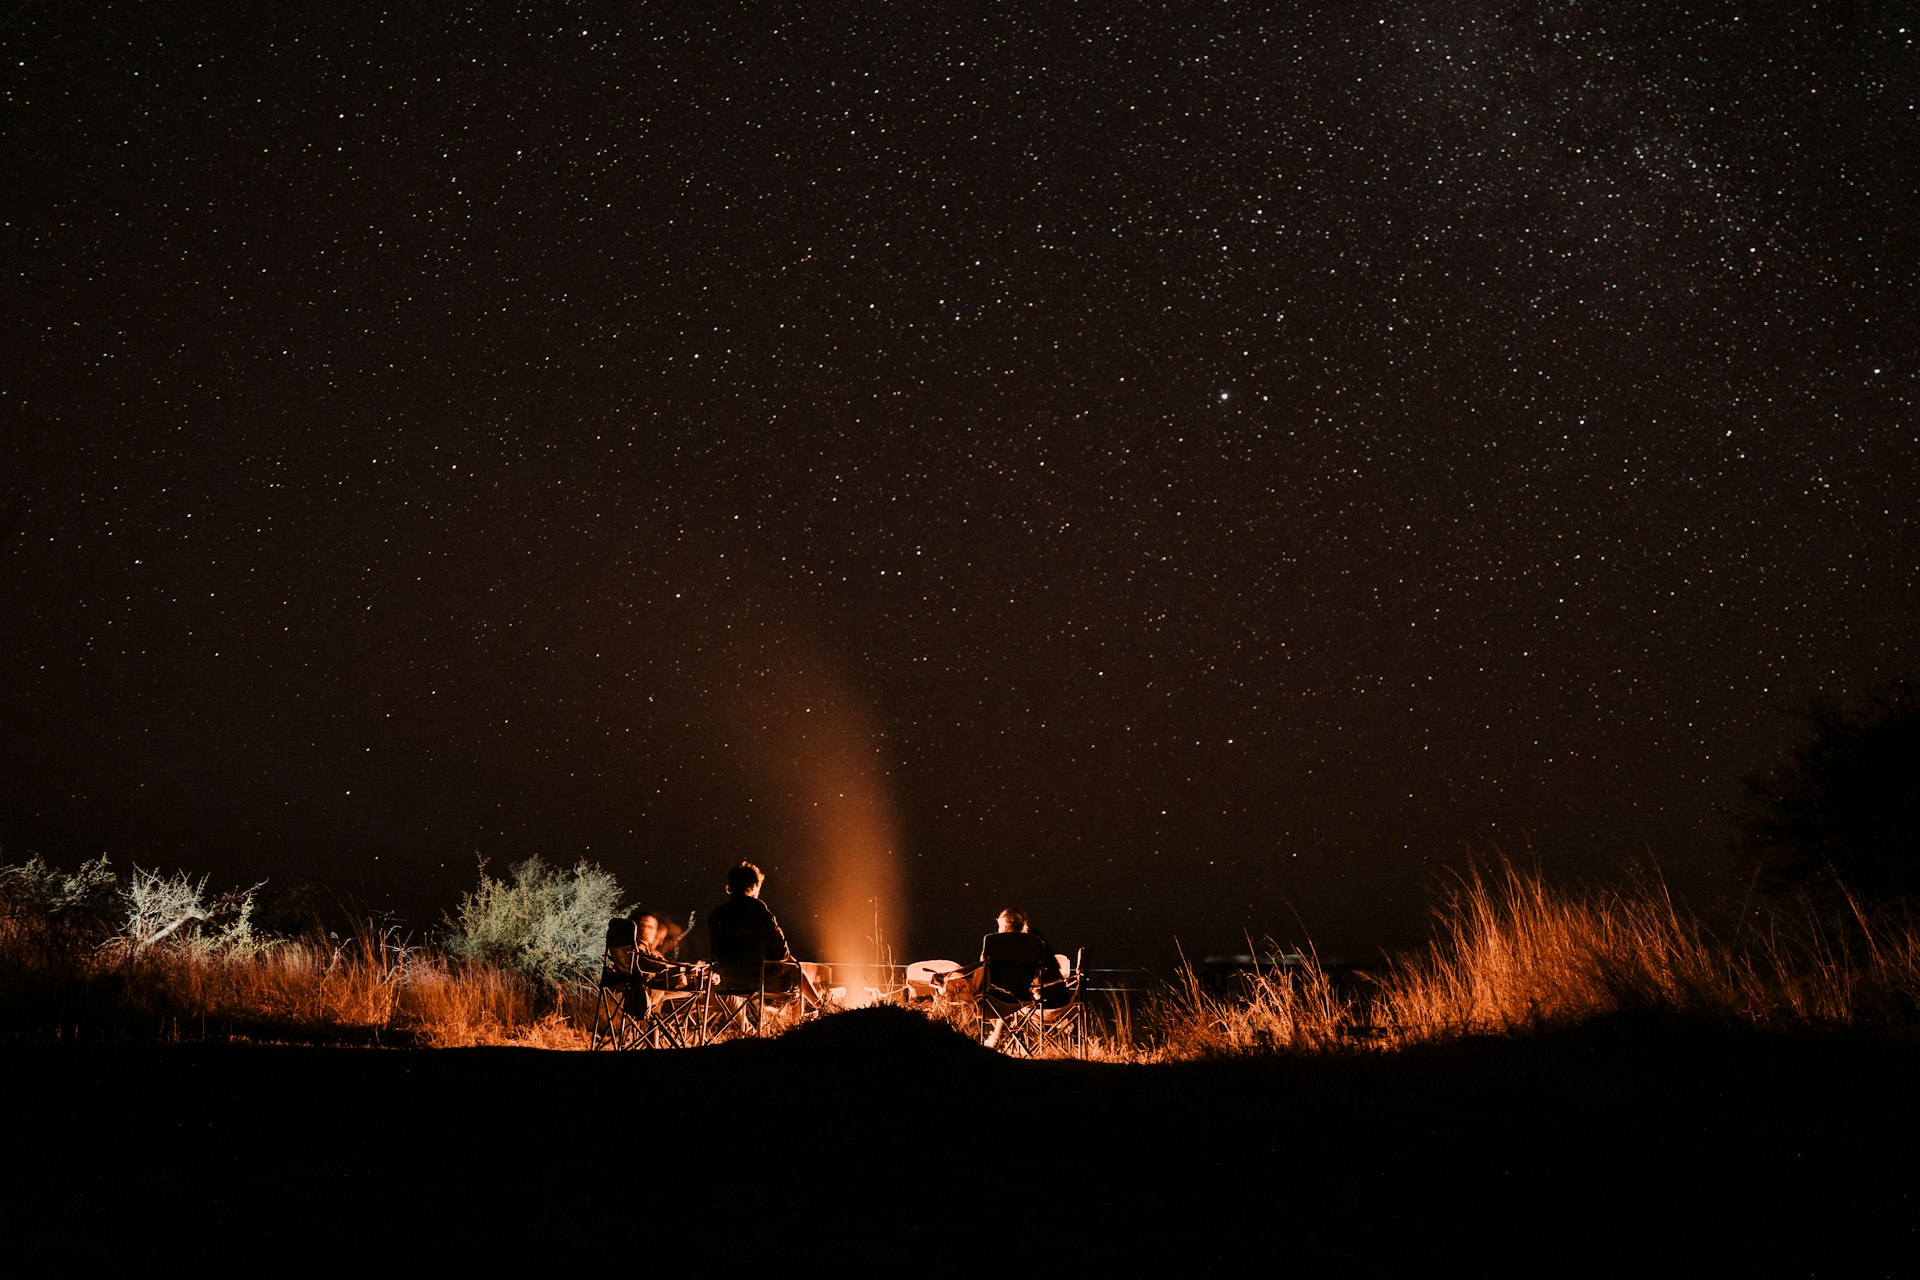 People gather around a campfire under a starry night sky in Botswana